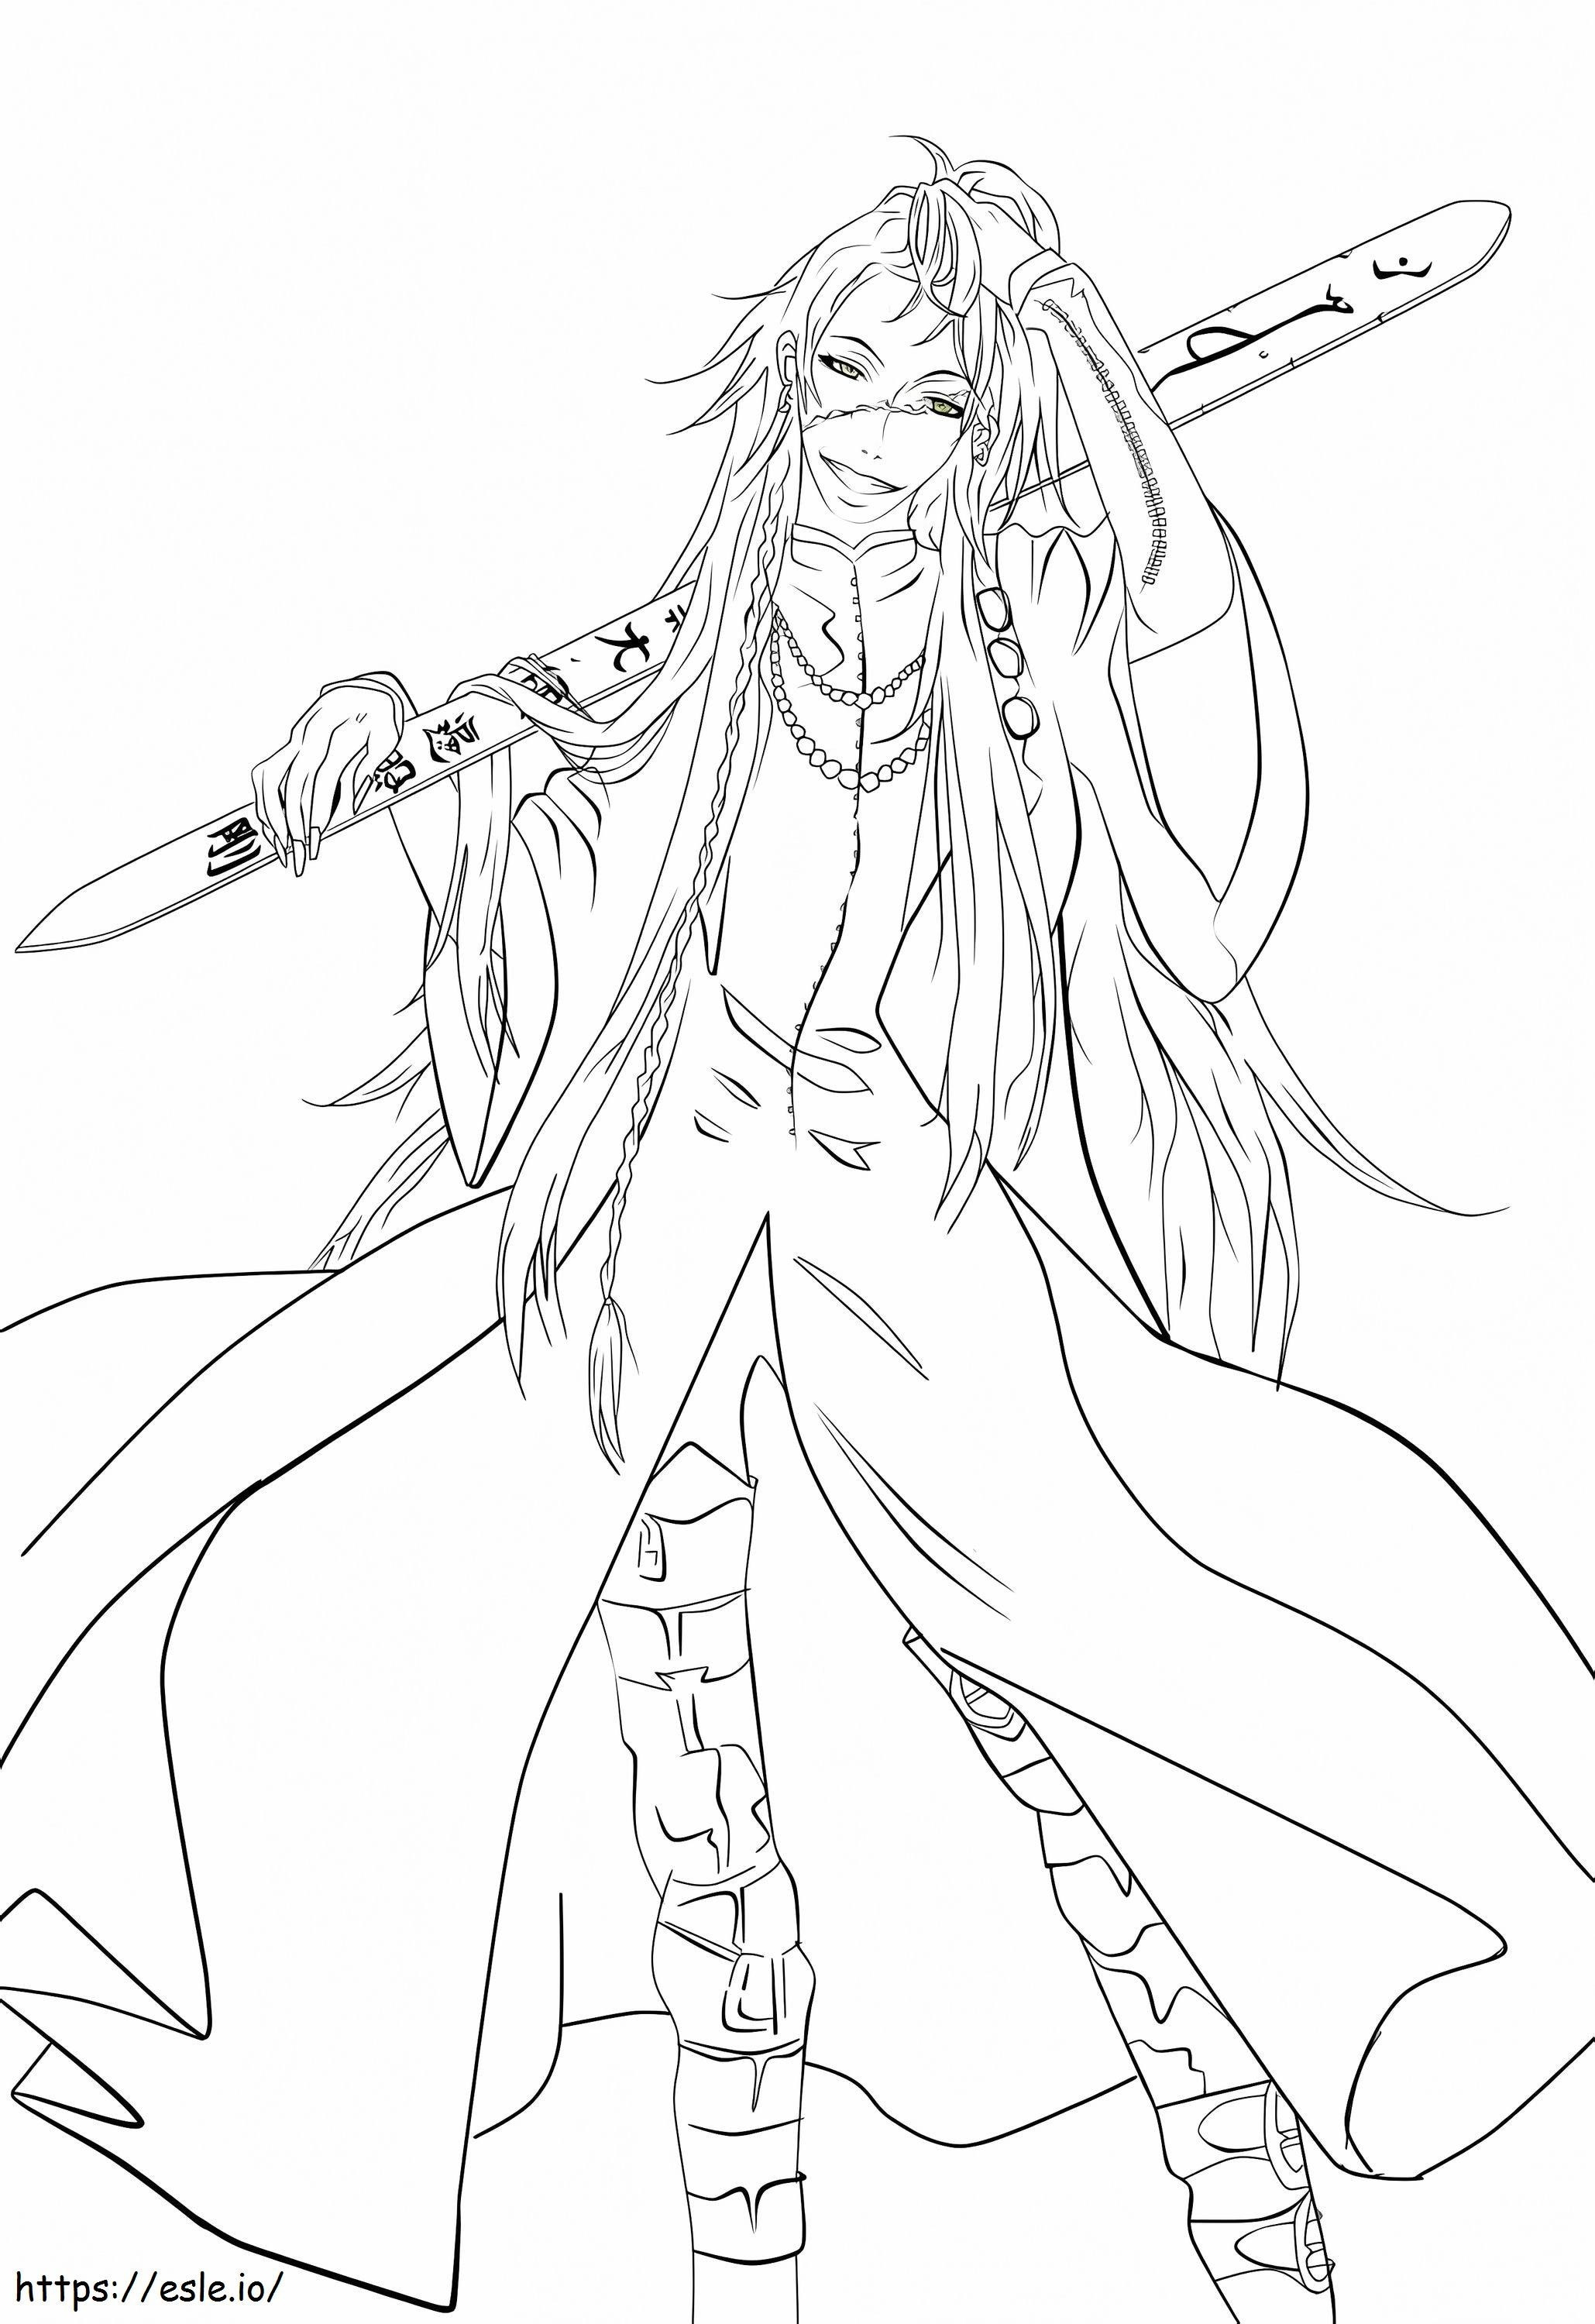 The Undertaker From Black Butler coloring page